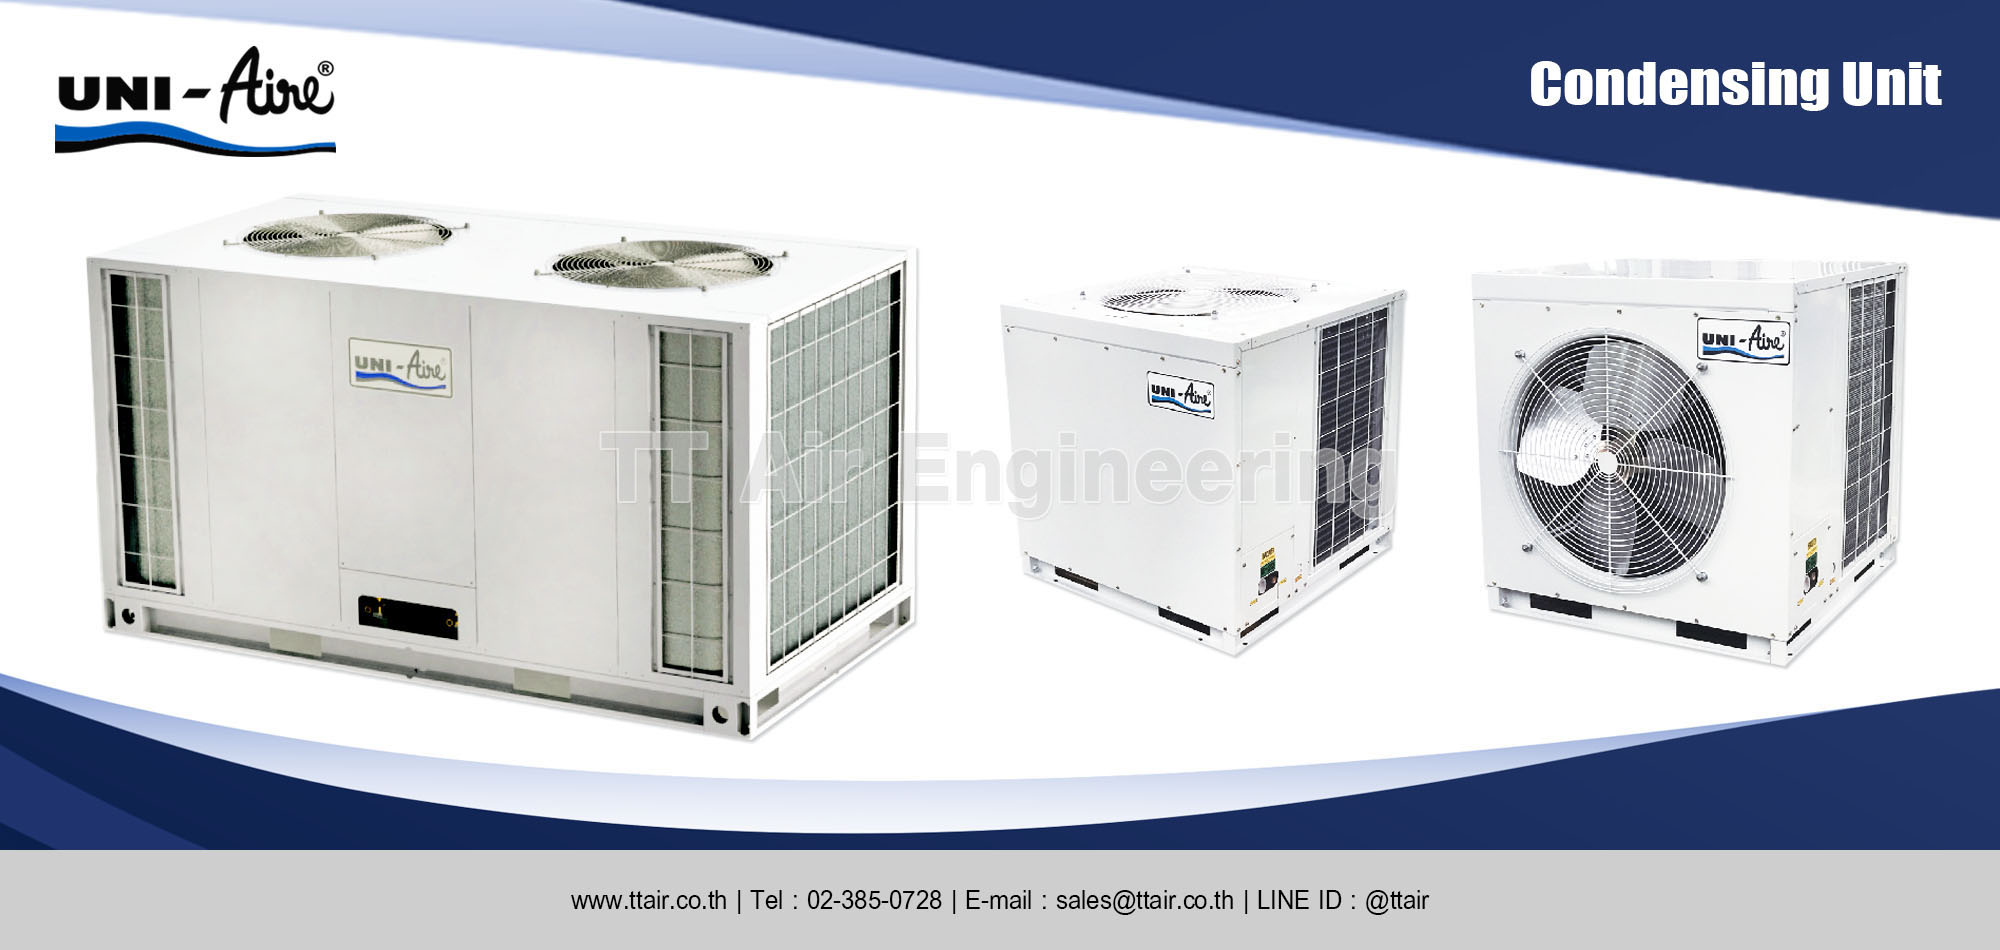 UNI-Aire Condensing Unit category